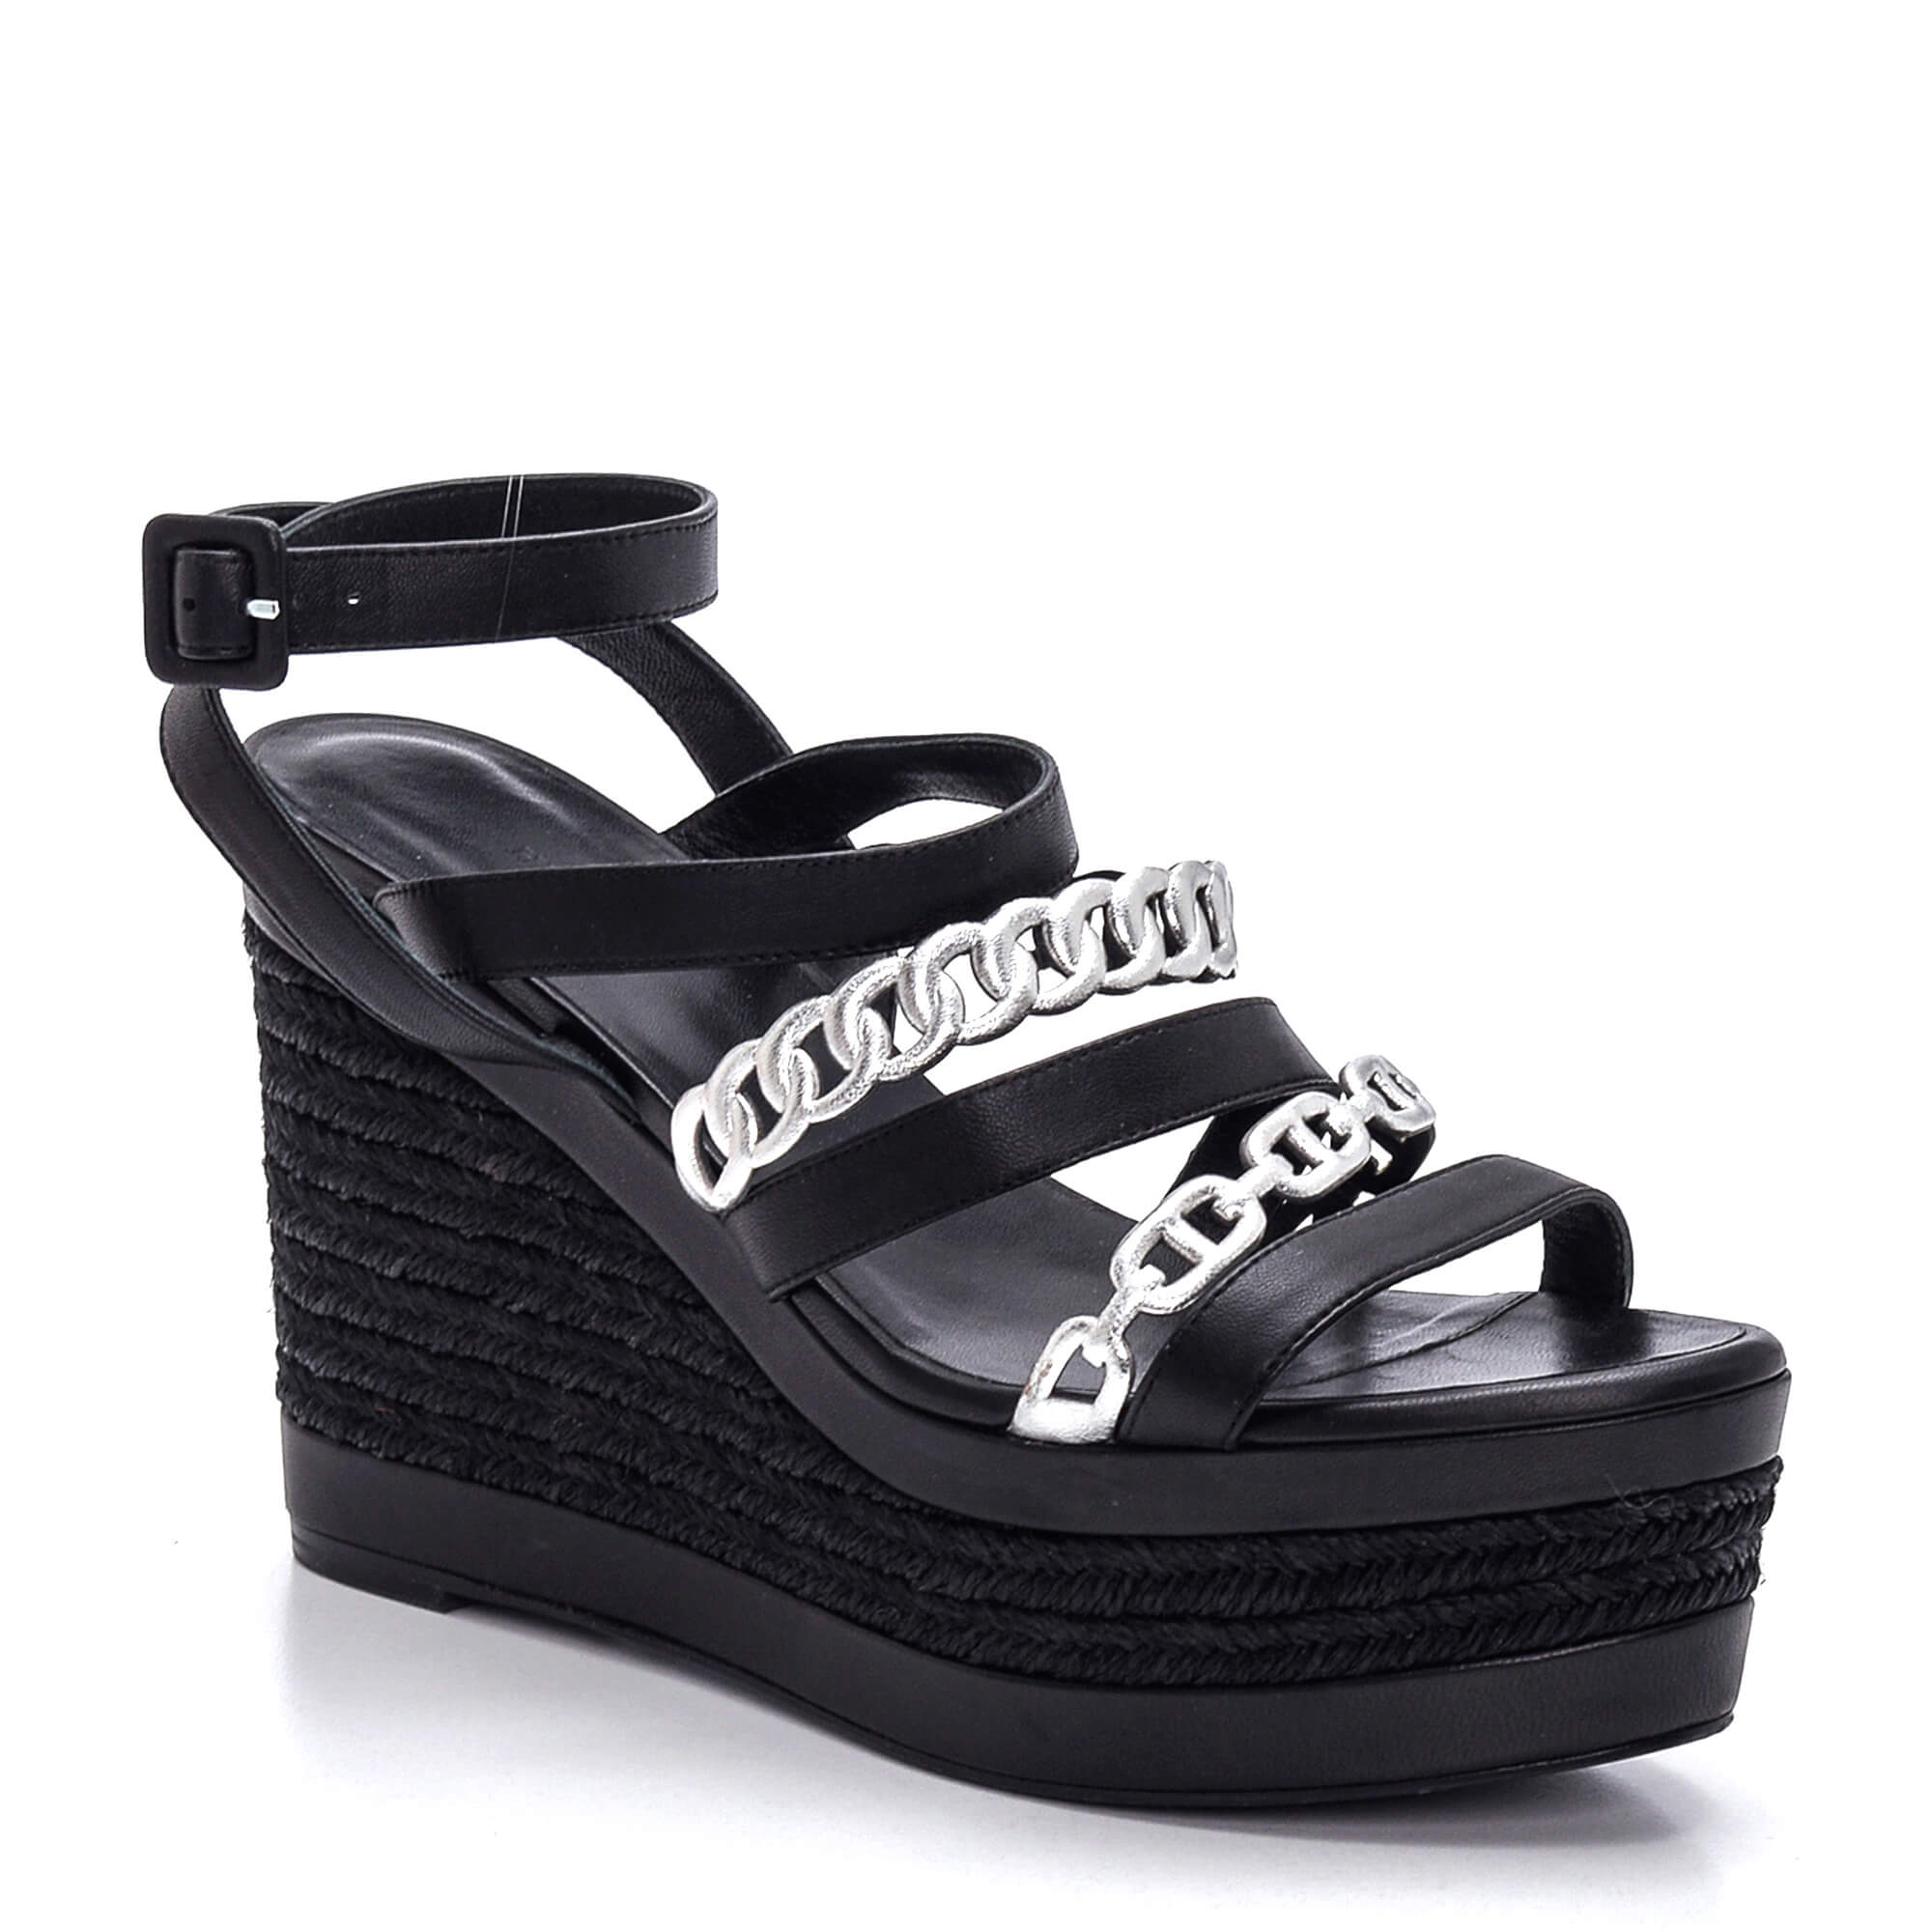 Hermes - Black / Silver Leather Chain Wedge Espadrilles 